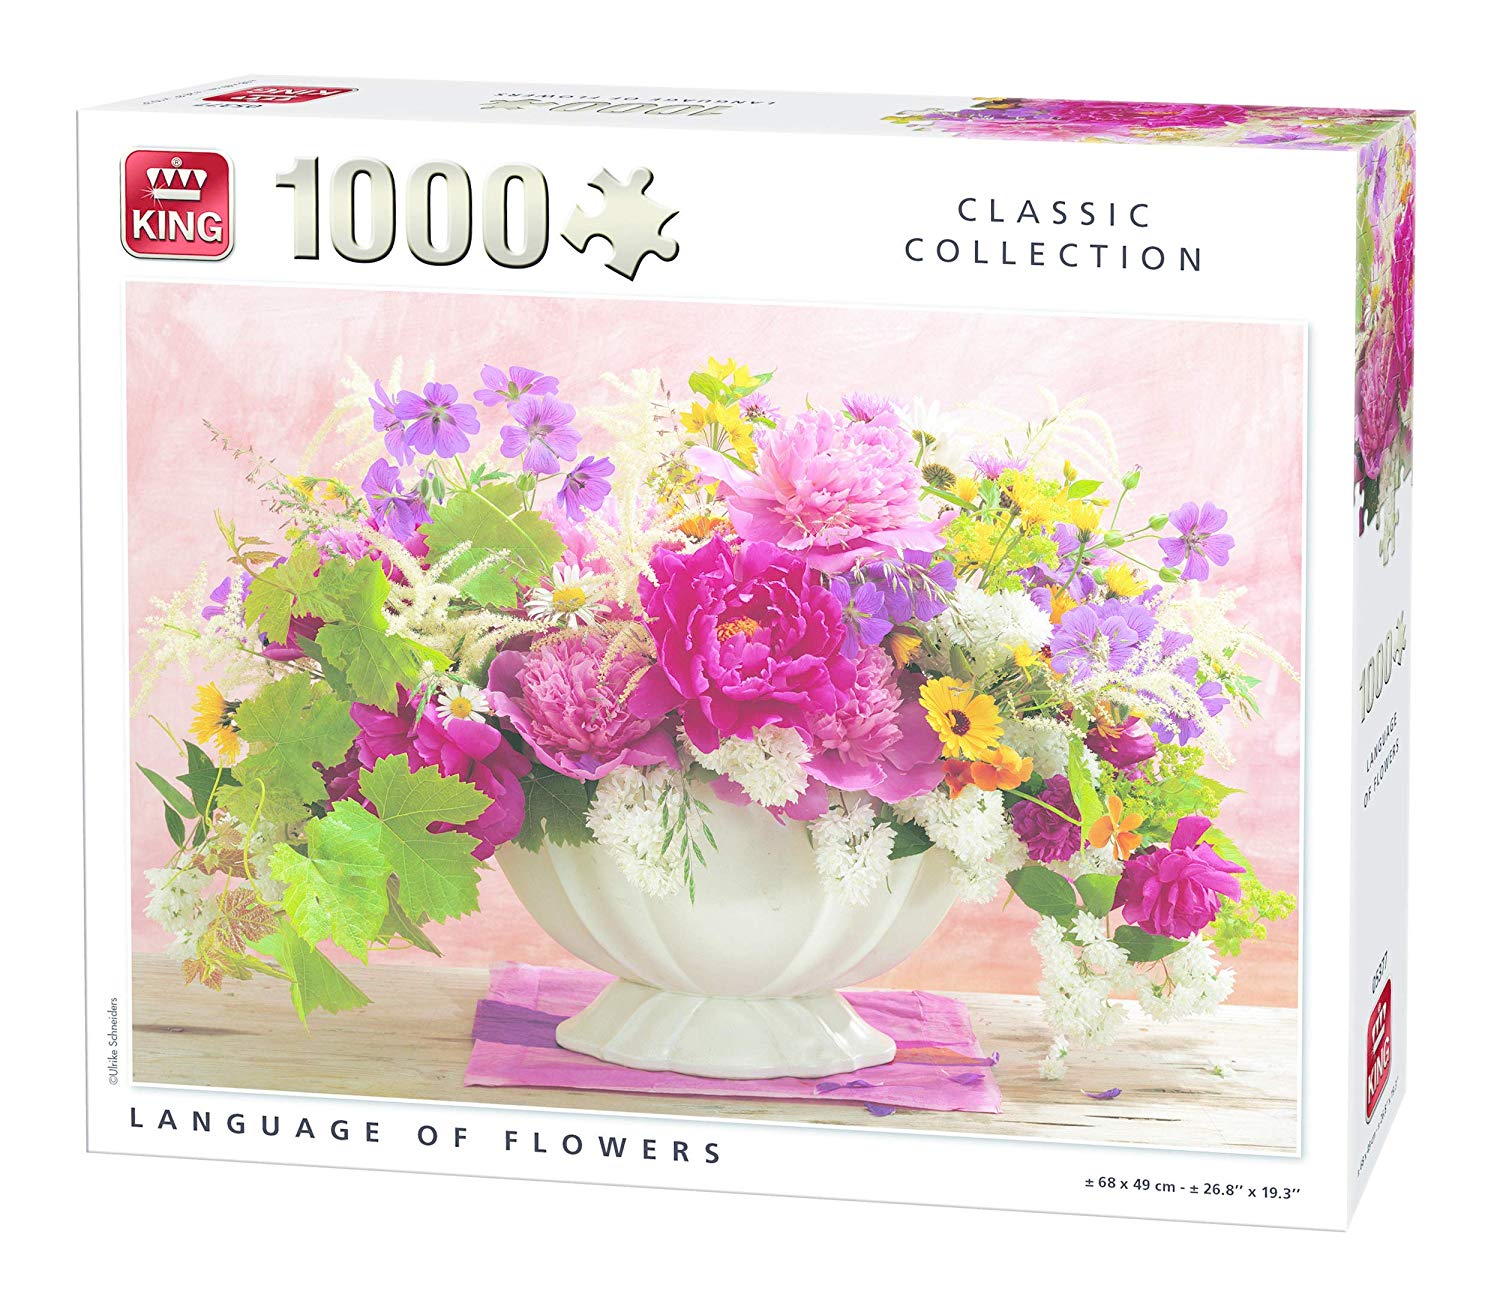 King Kng05377 Classic Language Of Flowers Jigsaw Puzzle (1000 Pieces)